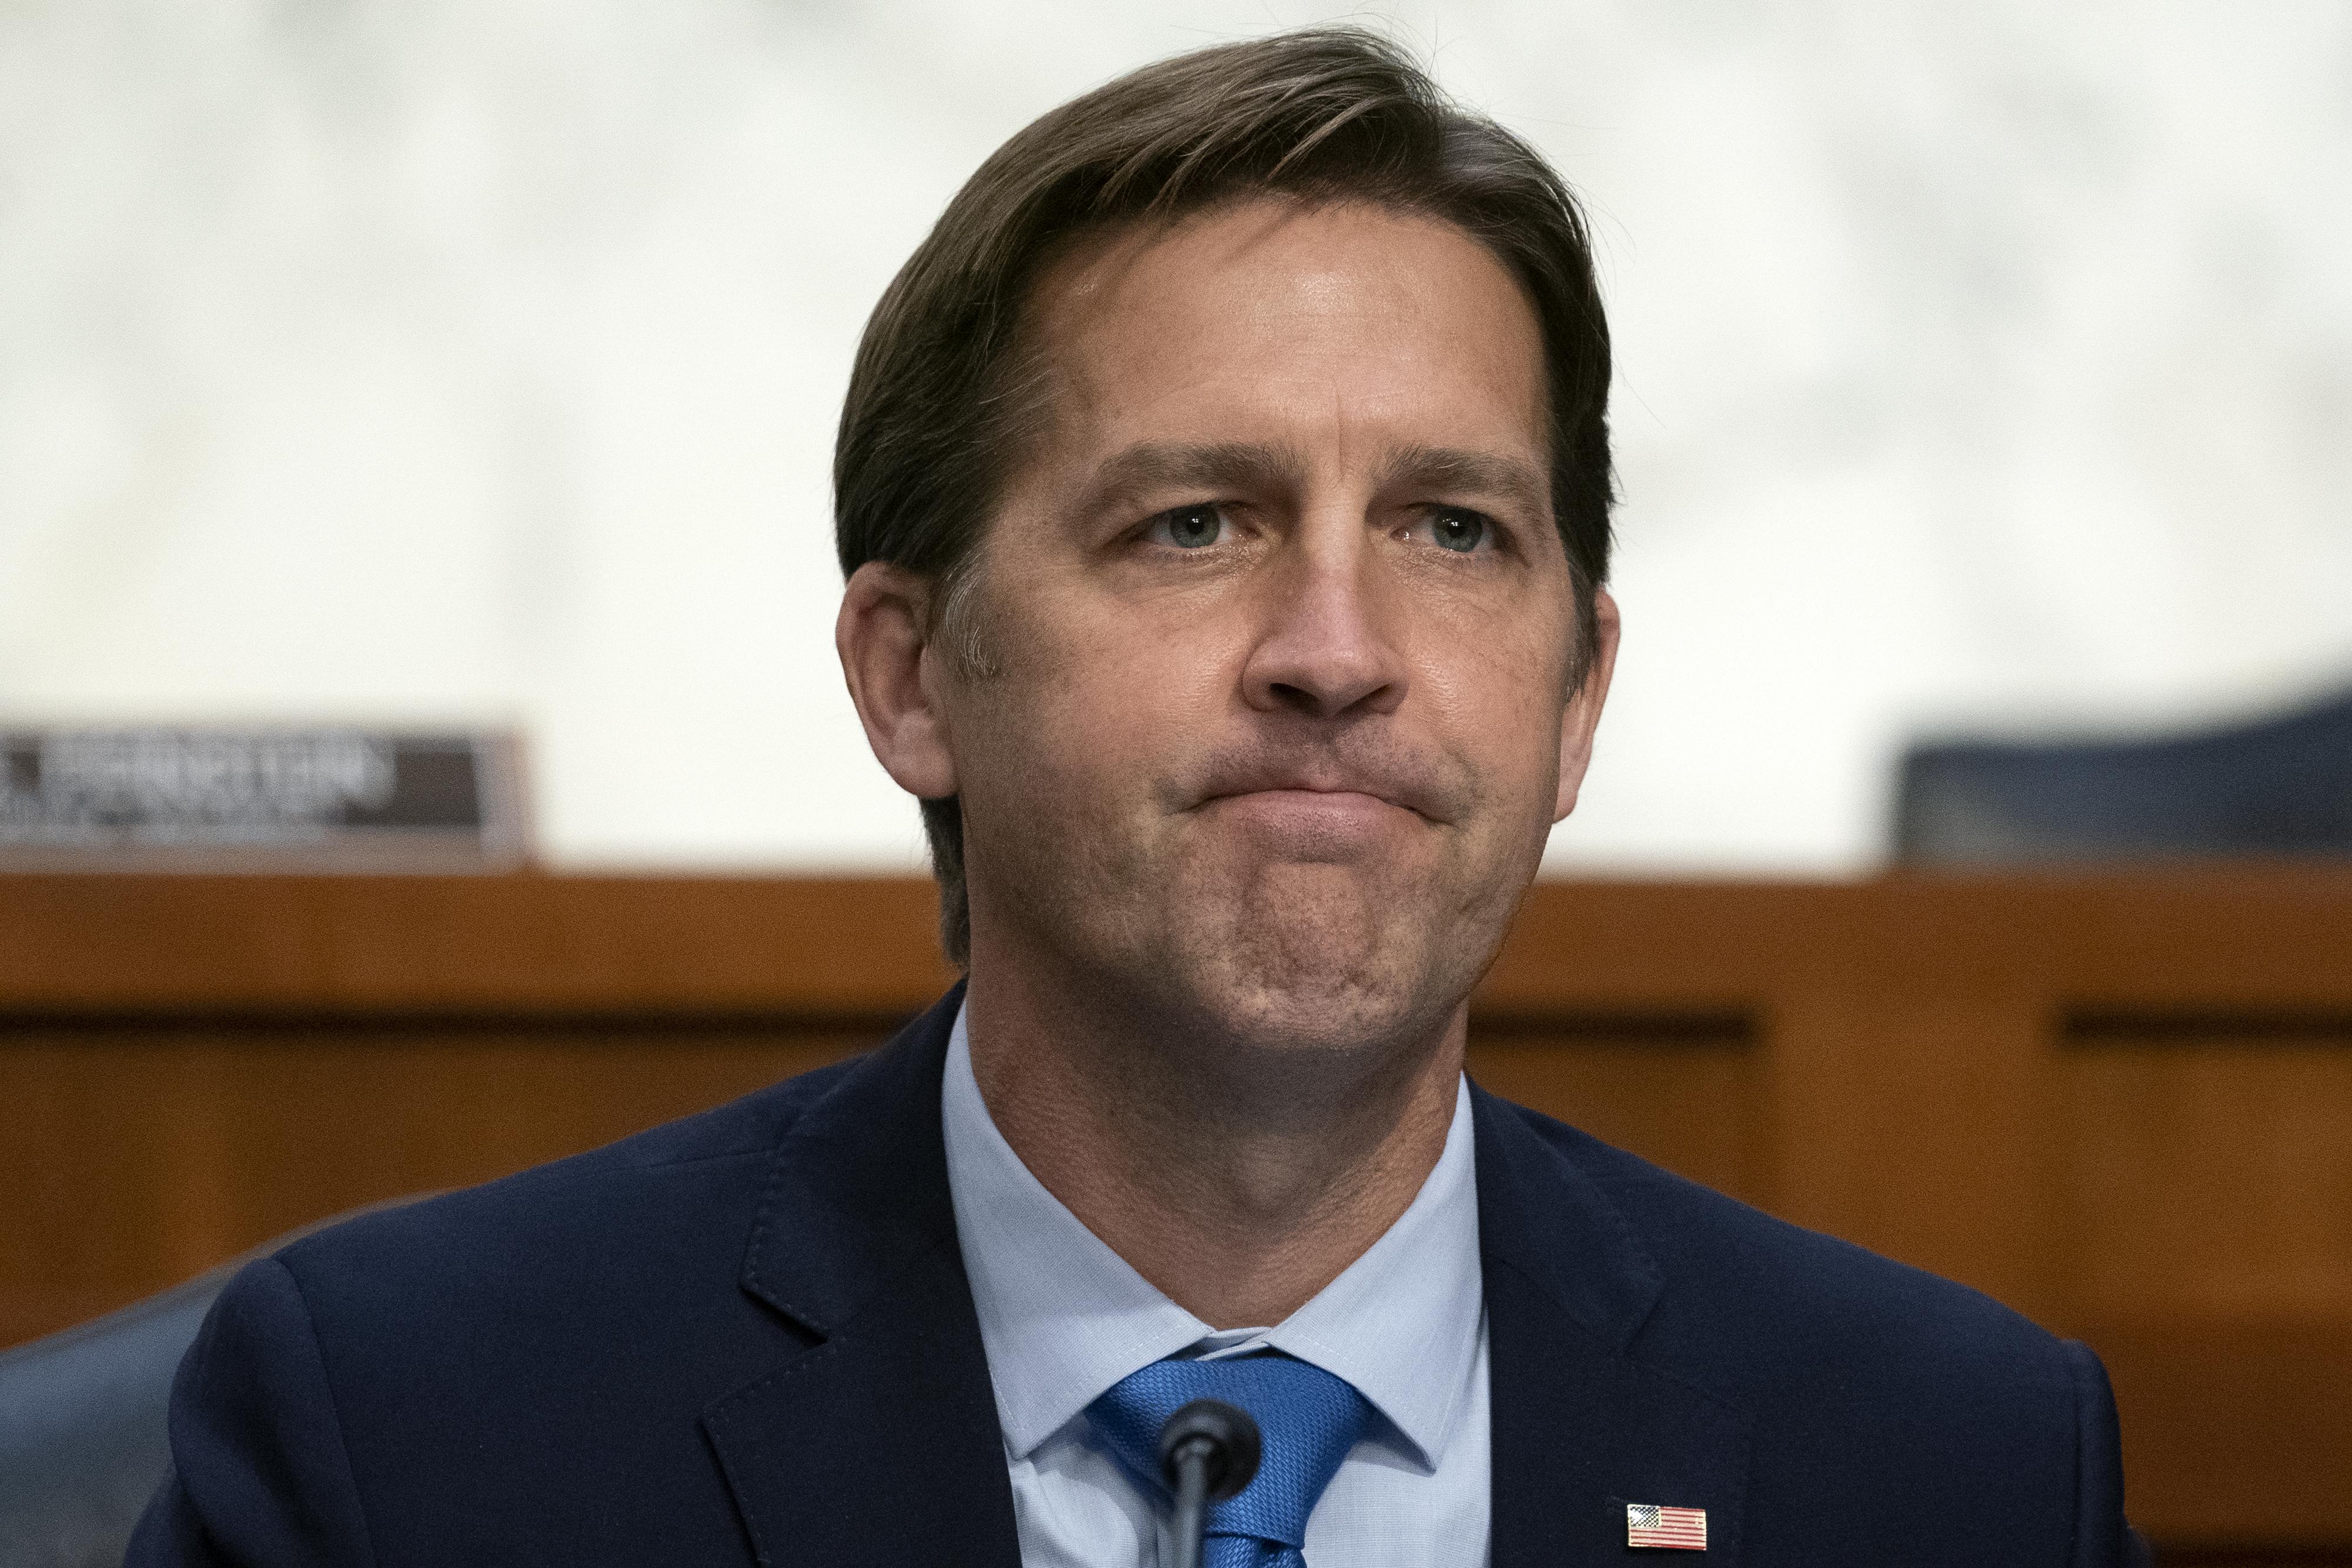 Sen. Ben Sasse (R-NE) listens as Supreme Court nominee Judge Amy Coney Barrett testifies before the Senate Judiciary Committee on the third day of her Supreme Court confirmation hearing on Capitol Hill on October 14, 2020 in Washington, D.C.